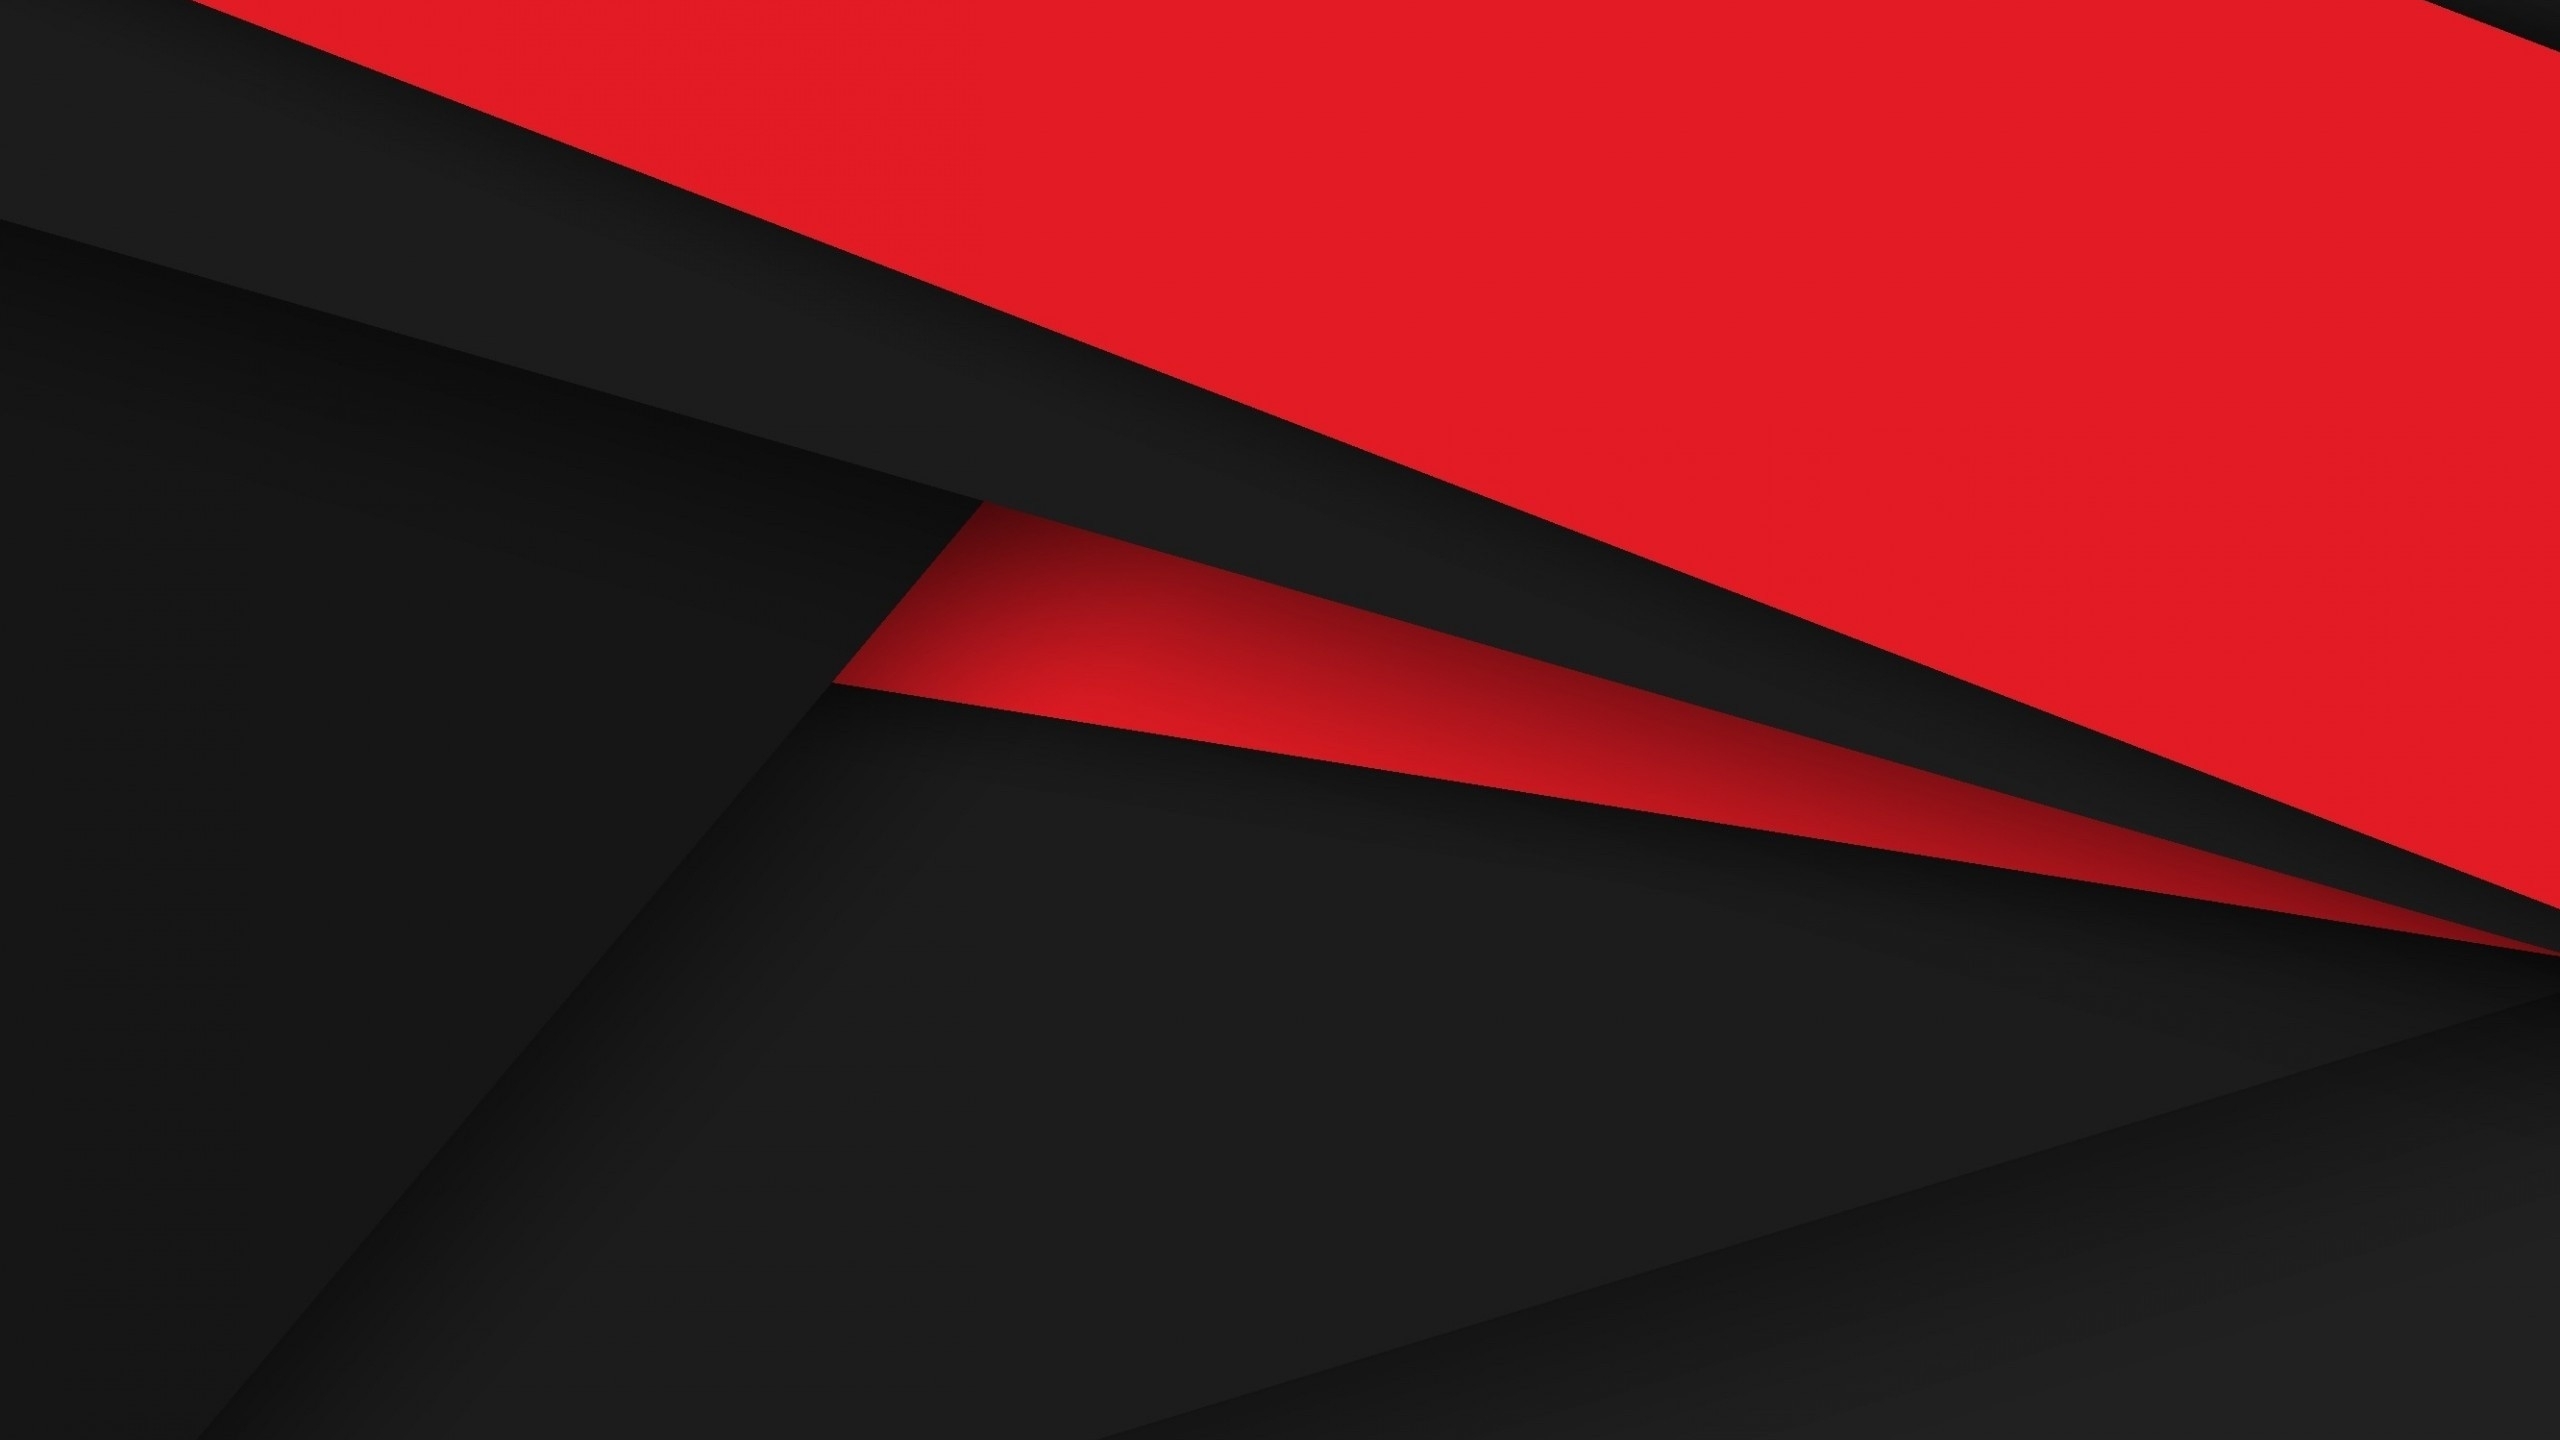 10 Most Popular Red And Black Backgrounds FULL HD 1080p For PC Desktop 2021